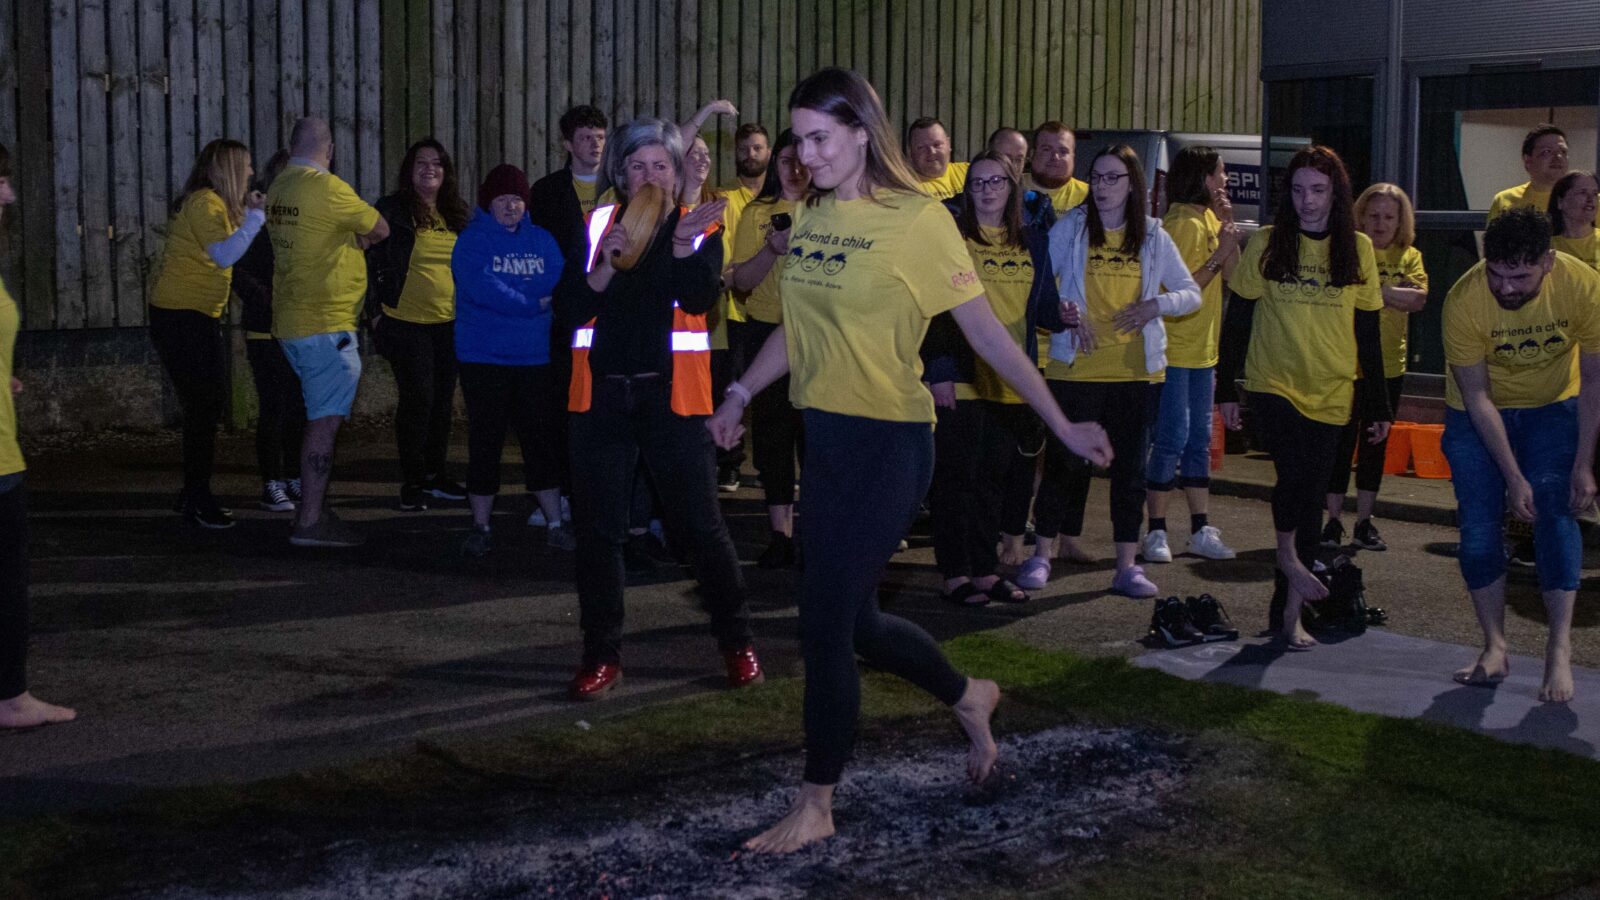 Befriend a Child challenges your mind, body and ‘sole’ with The Return of the Inferno Firewalk